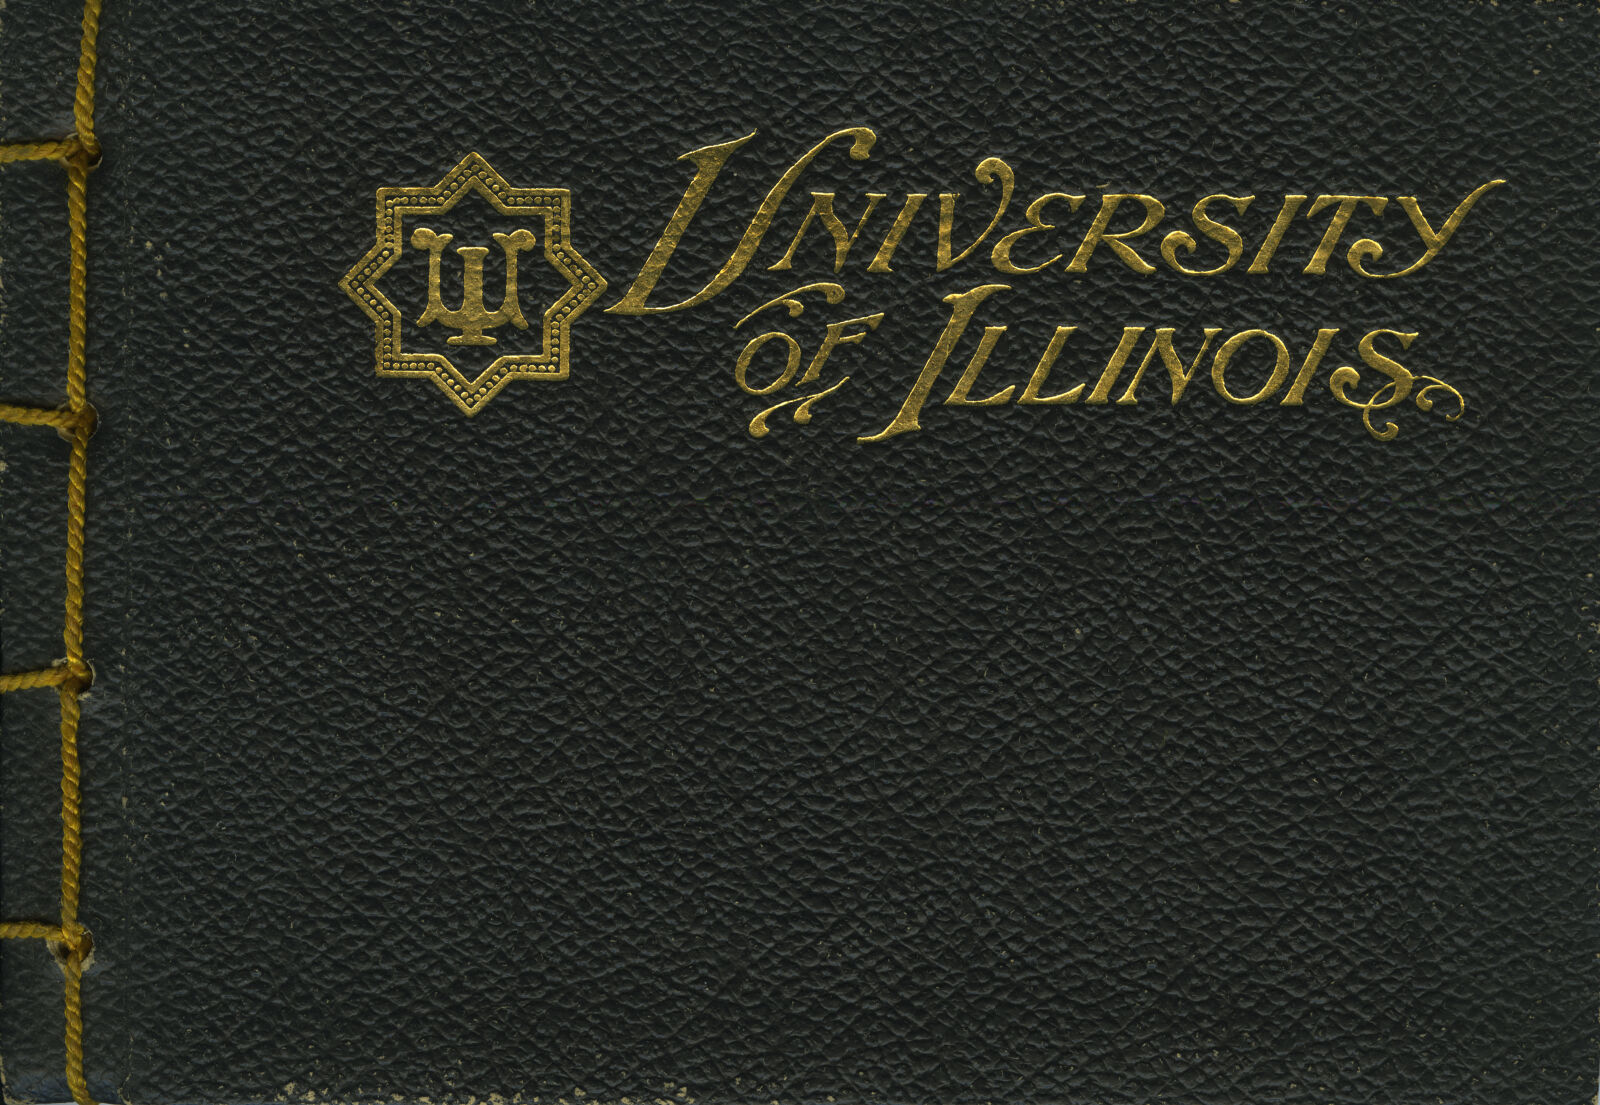 Viewbook of the University of Illinois (1893) | Digital Collections at ...